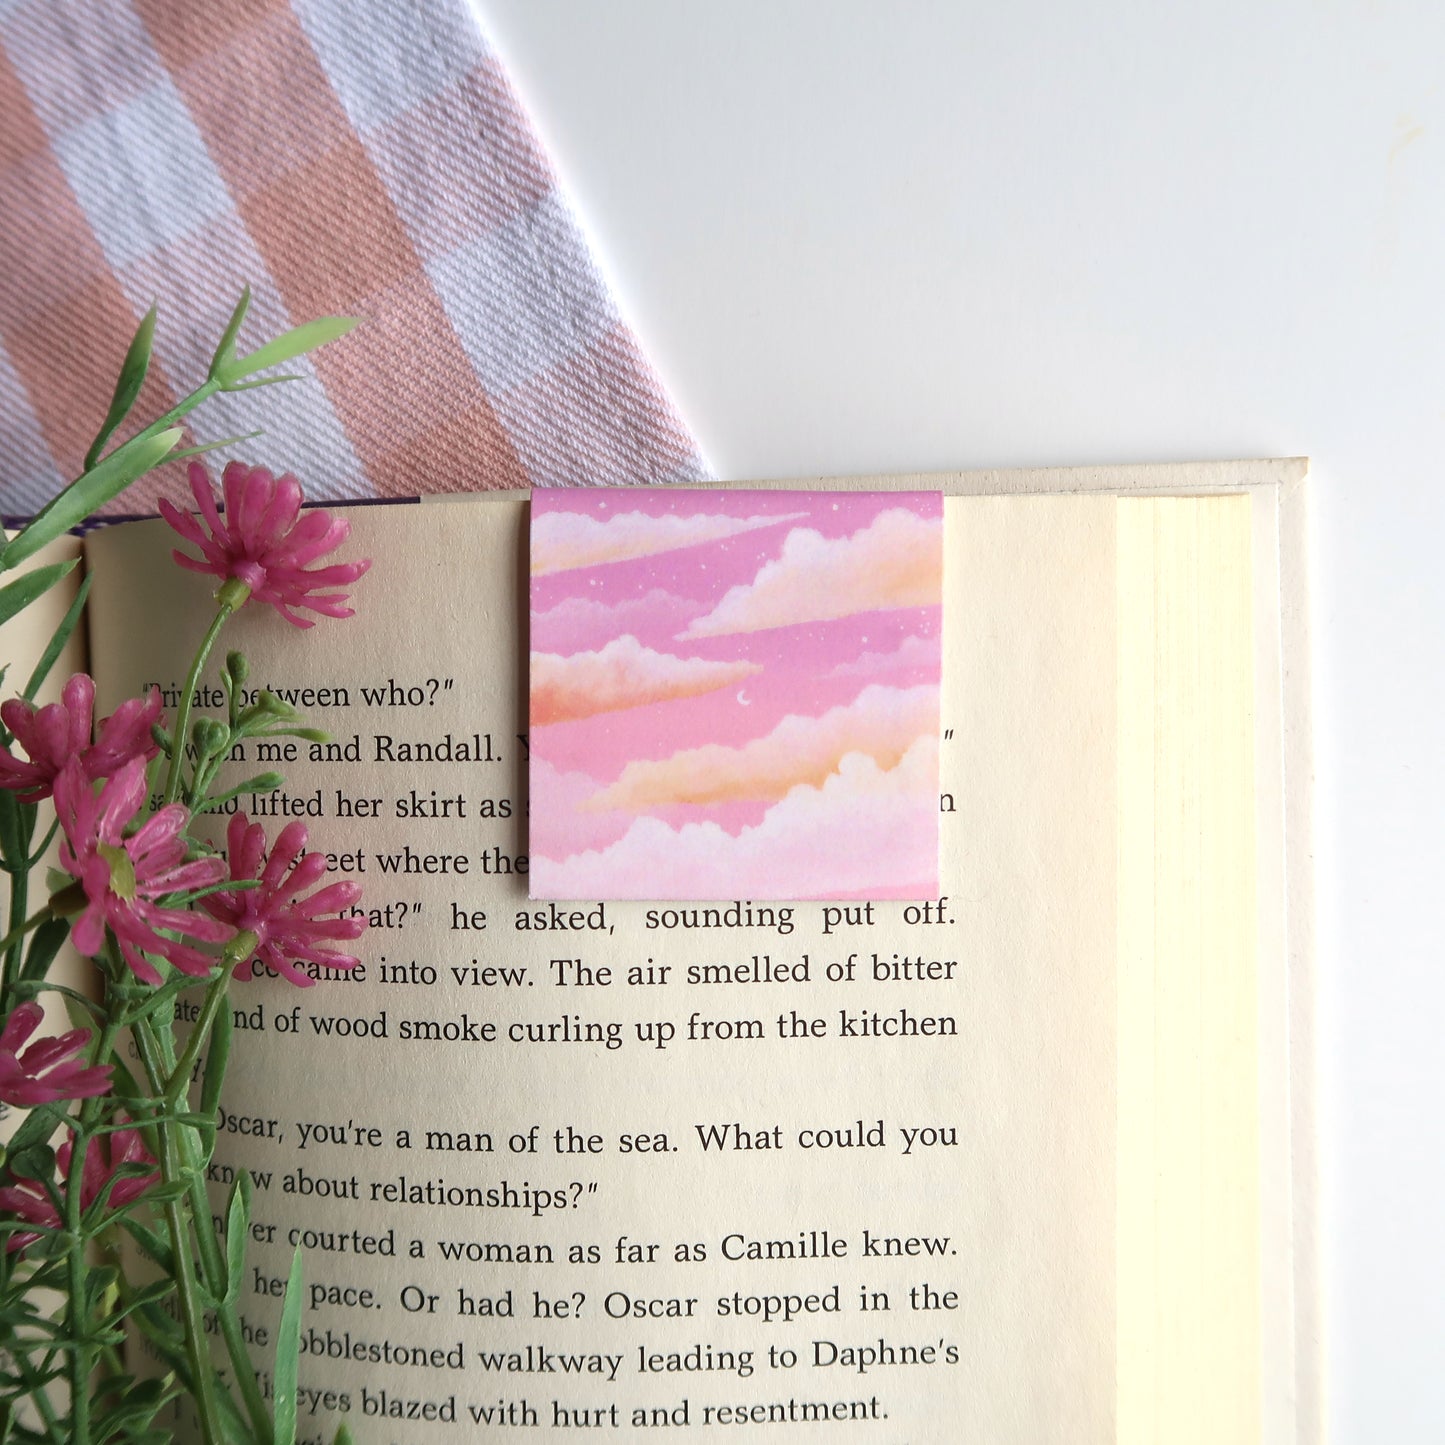 Dreamy Pink Sunset Sky - Magnetic Bookmark